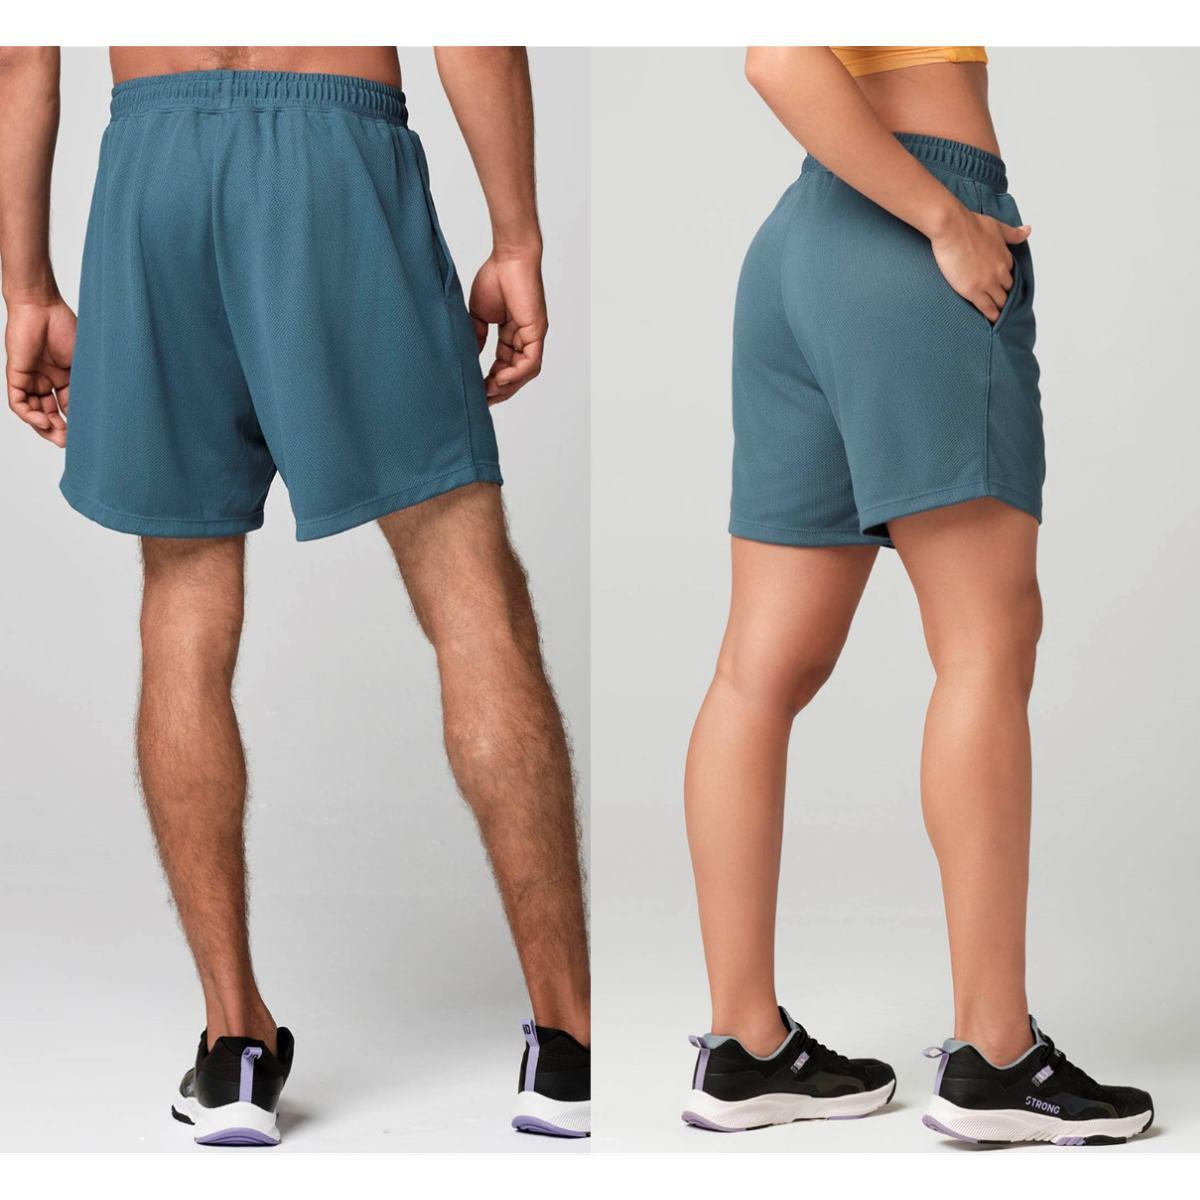 Bring Your Power Mesh Shorts